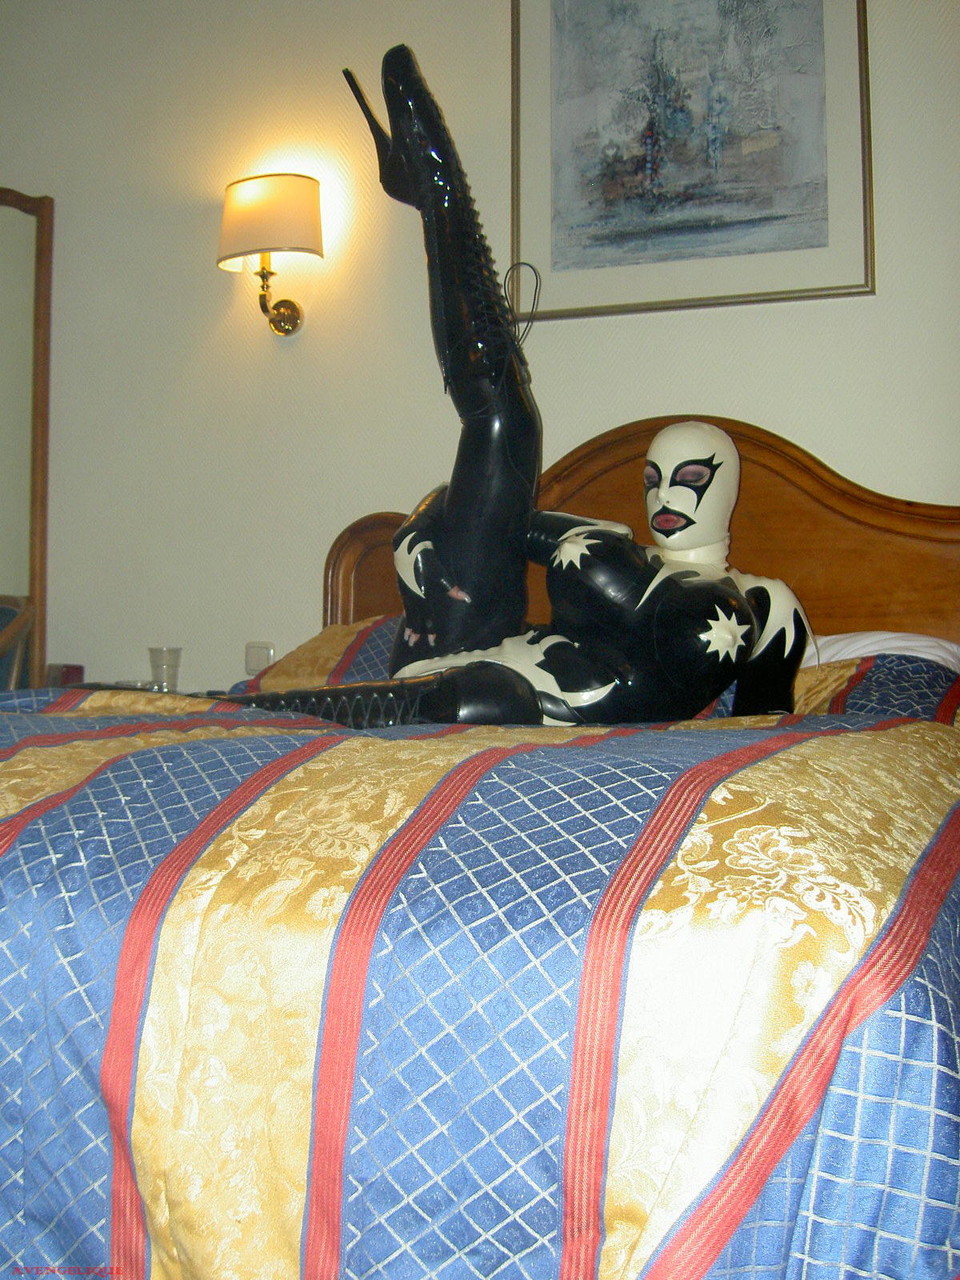 Fetish model Darkwing Zero poses on a hotel room bed in latex clothing porn photo #426050023 | Rubber Tits Pics, Darkwing Zero, Latex, mobile porn